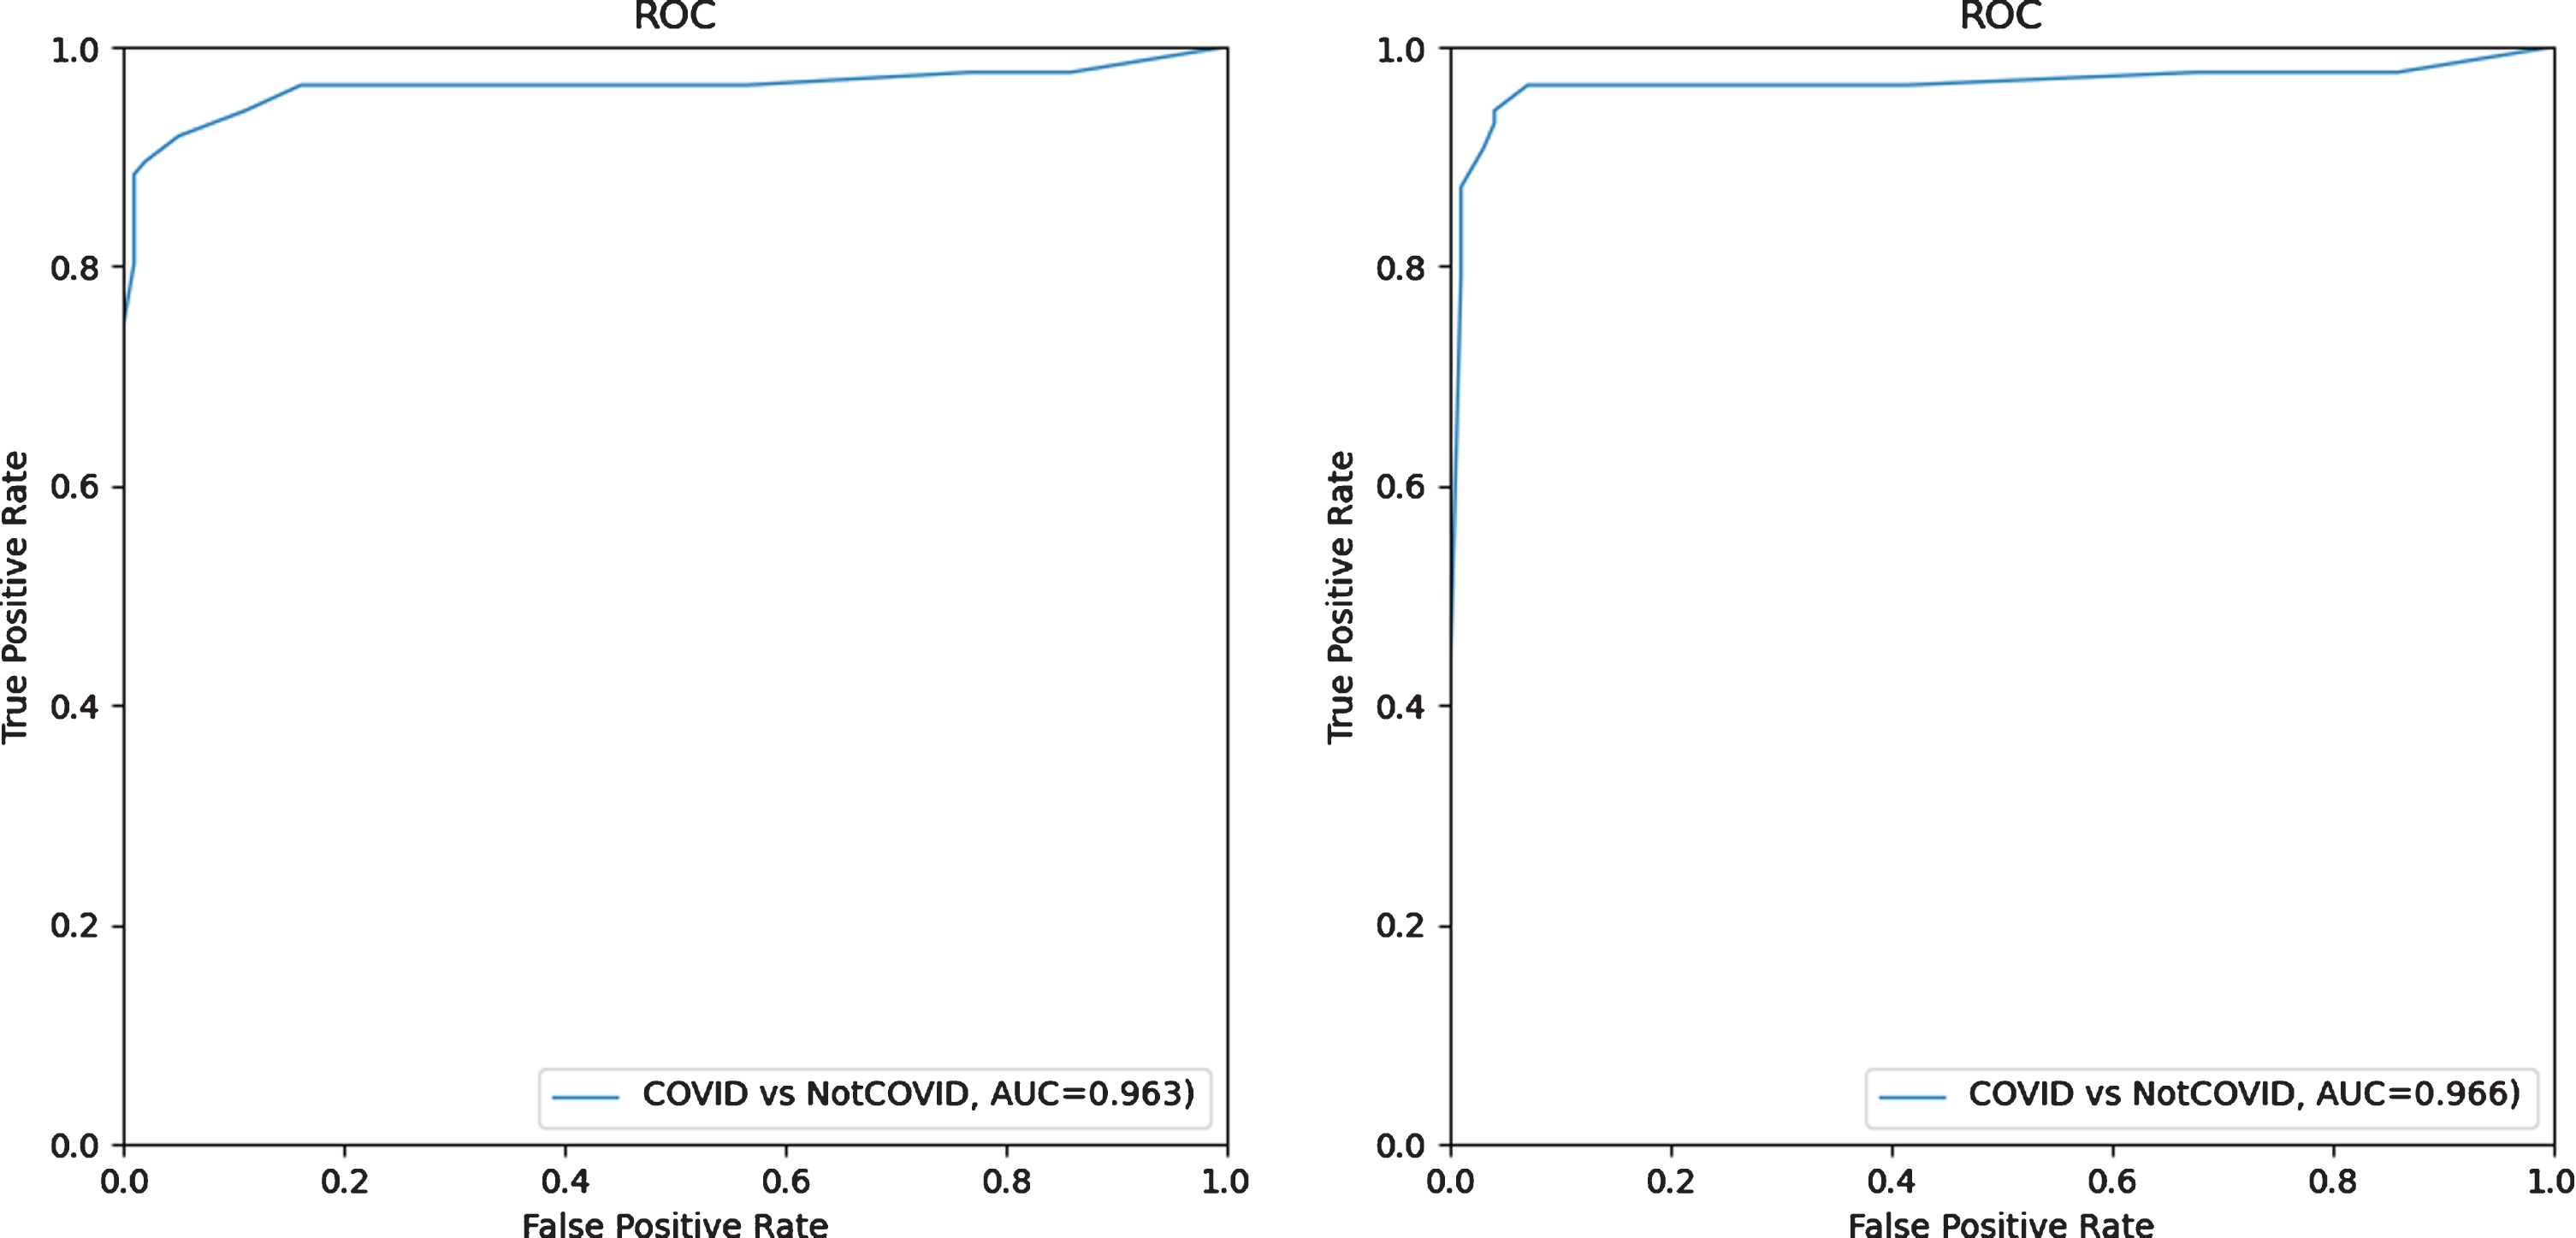 ROC curves of radiologist average on the test set without AI assistance (left) and with (right) AI assistance.